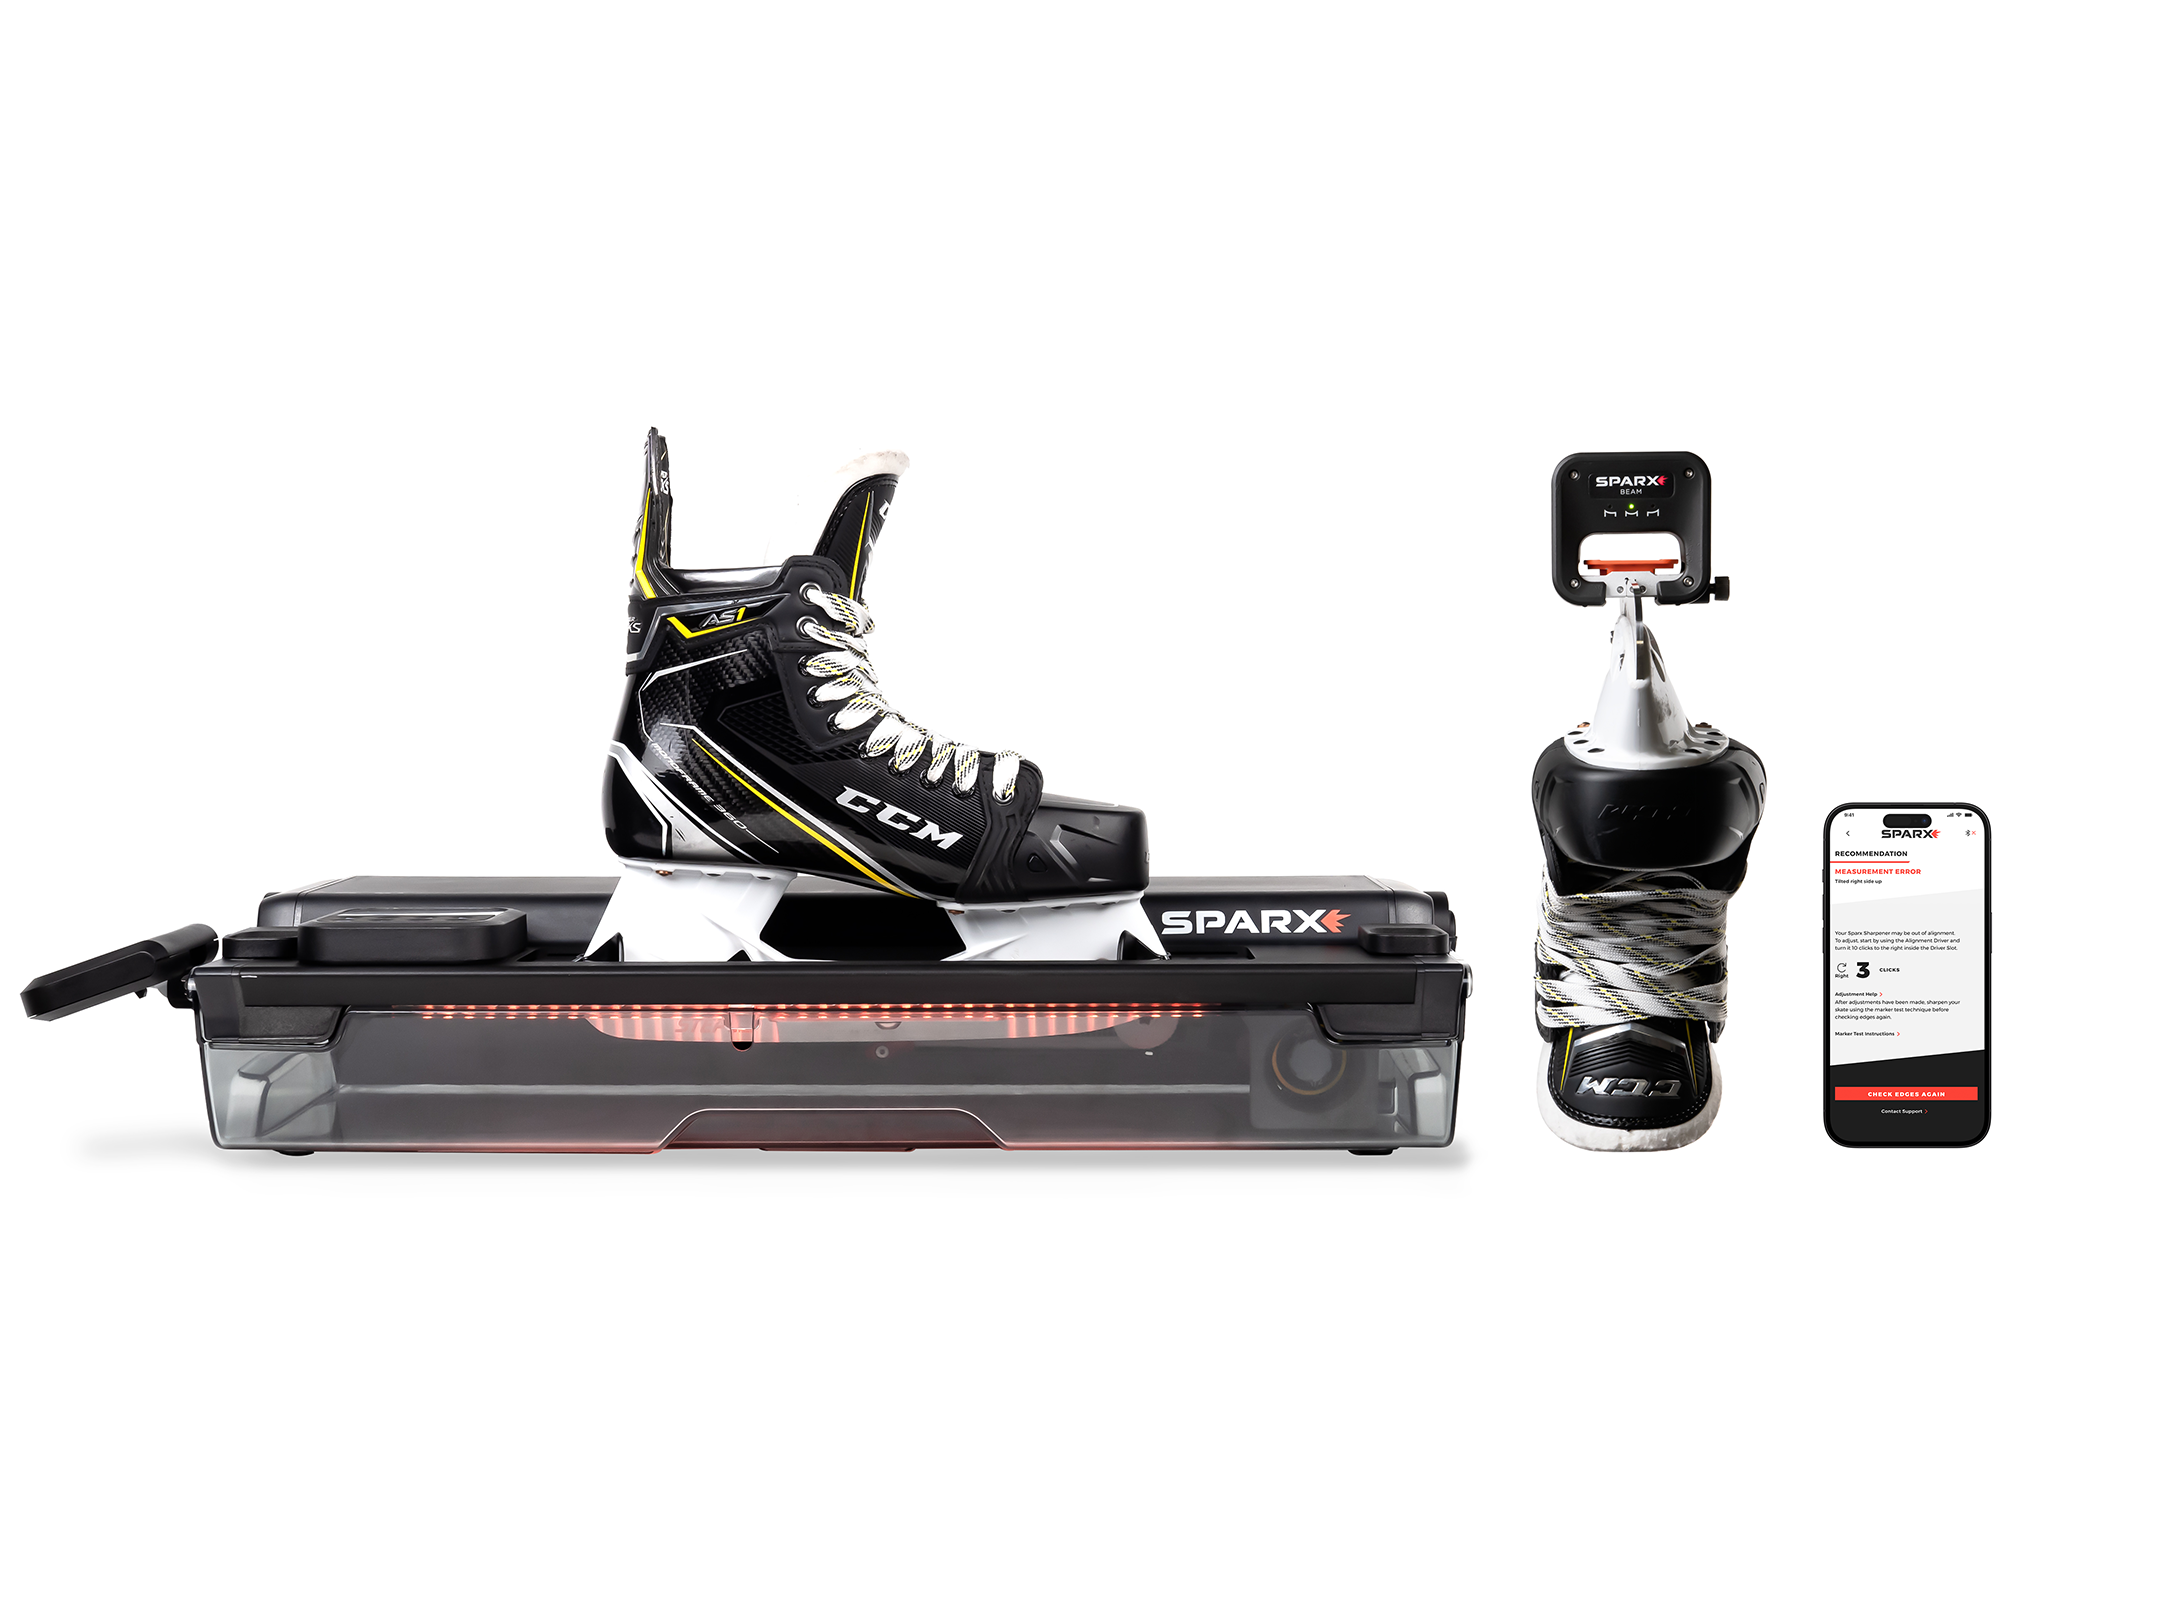 Skate Sharpener with skate, next to sharpened skate with blade up and mobile phone with sharpening app opened.